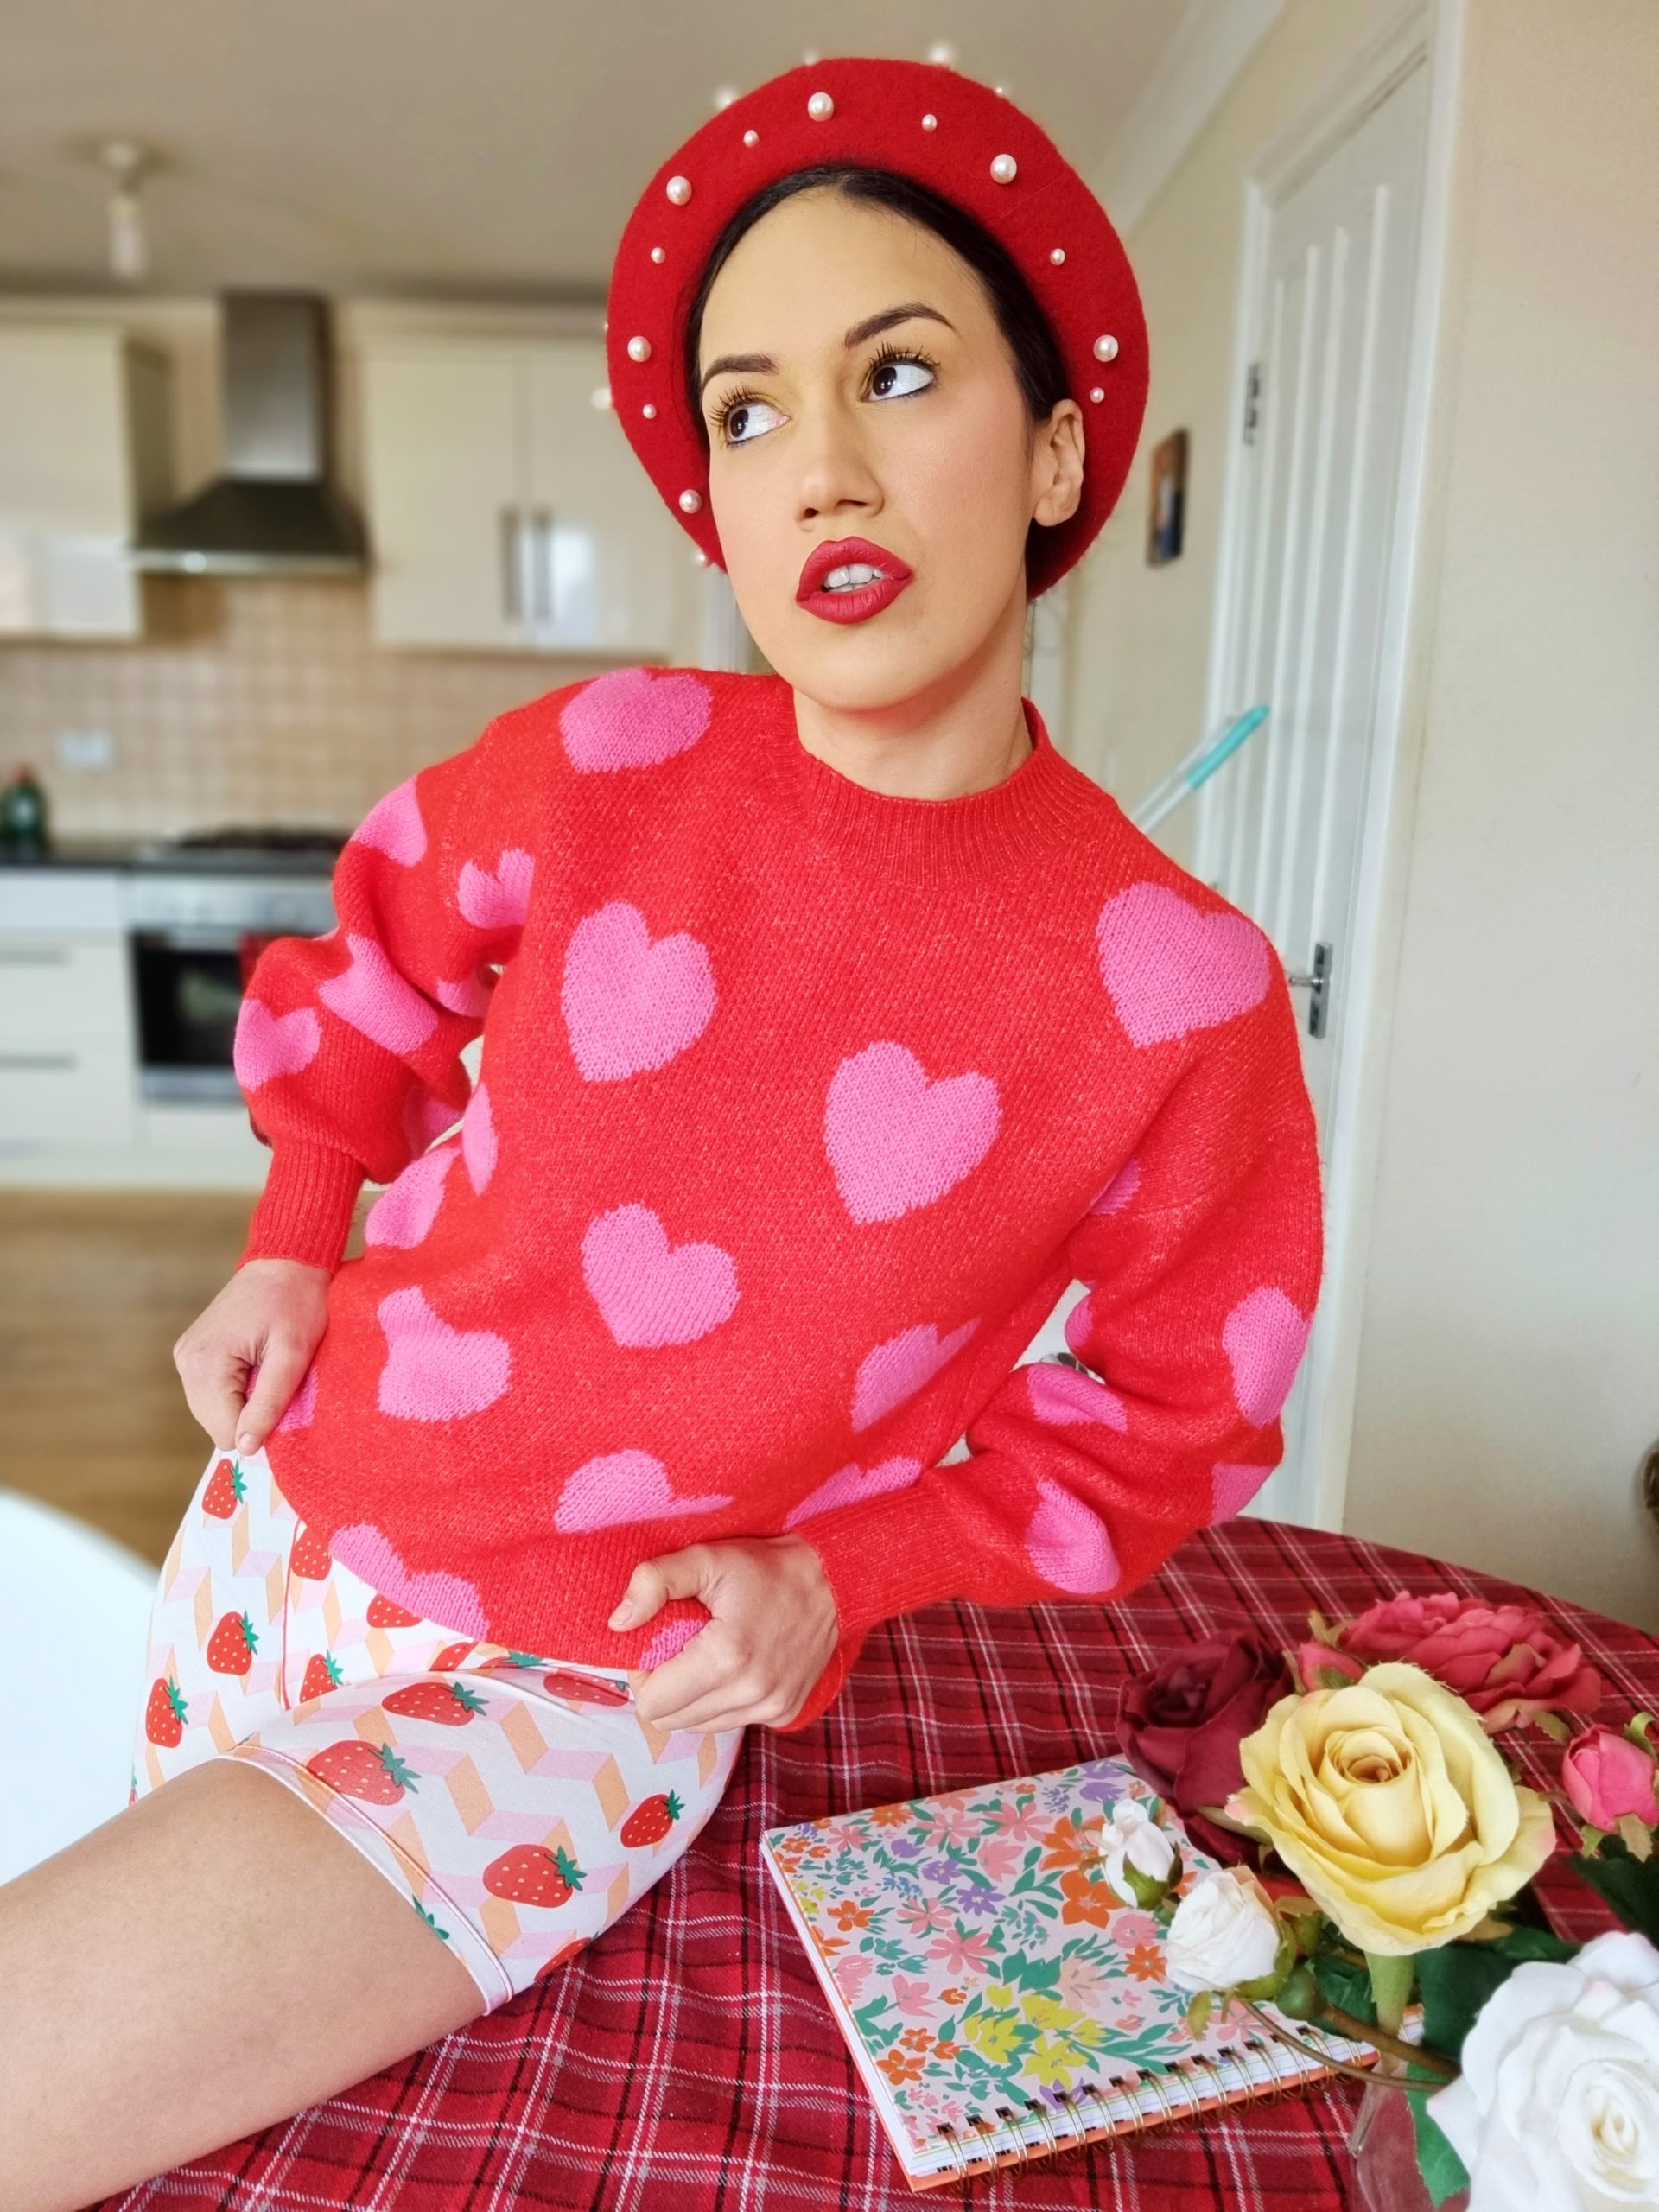 <img src="ana.jpg" alt="ana sitting on the table in strawberry pink colourful underwear"> 